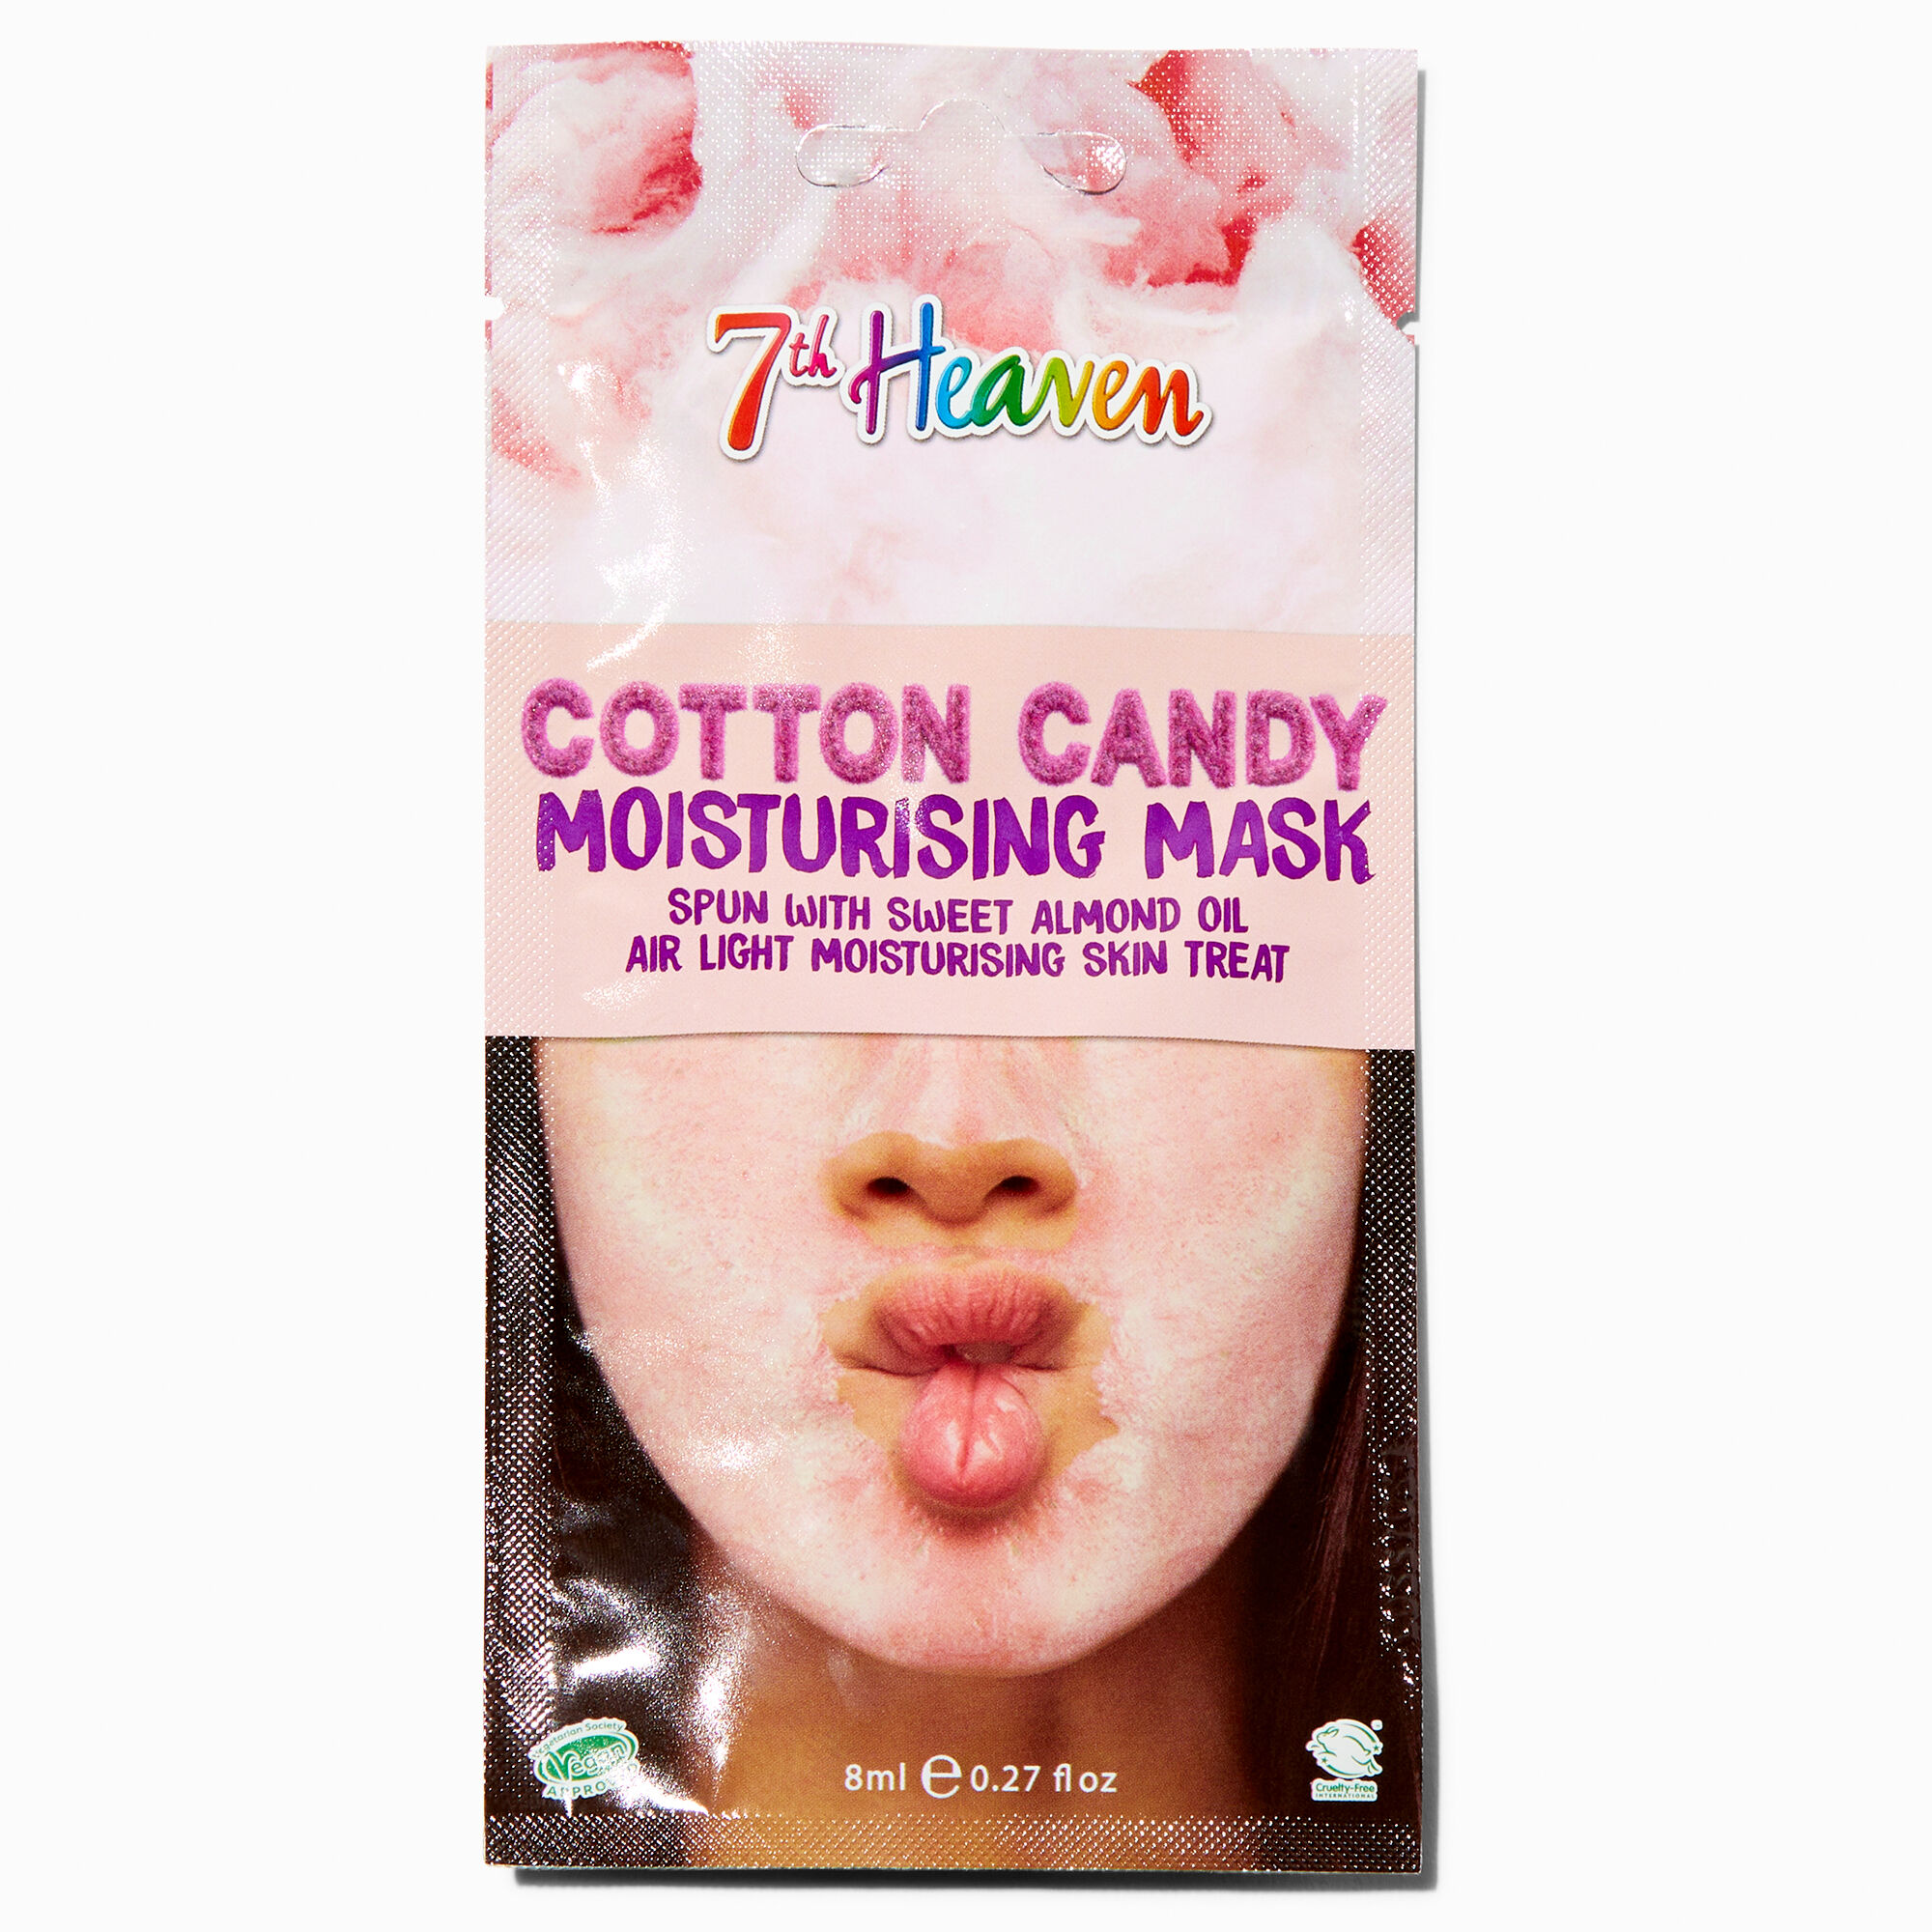 View Claires 7Th Heaven Cotton Candy Moisturizing Mask information